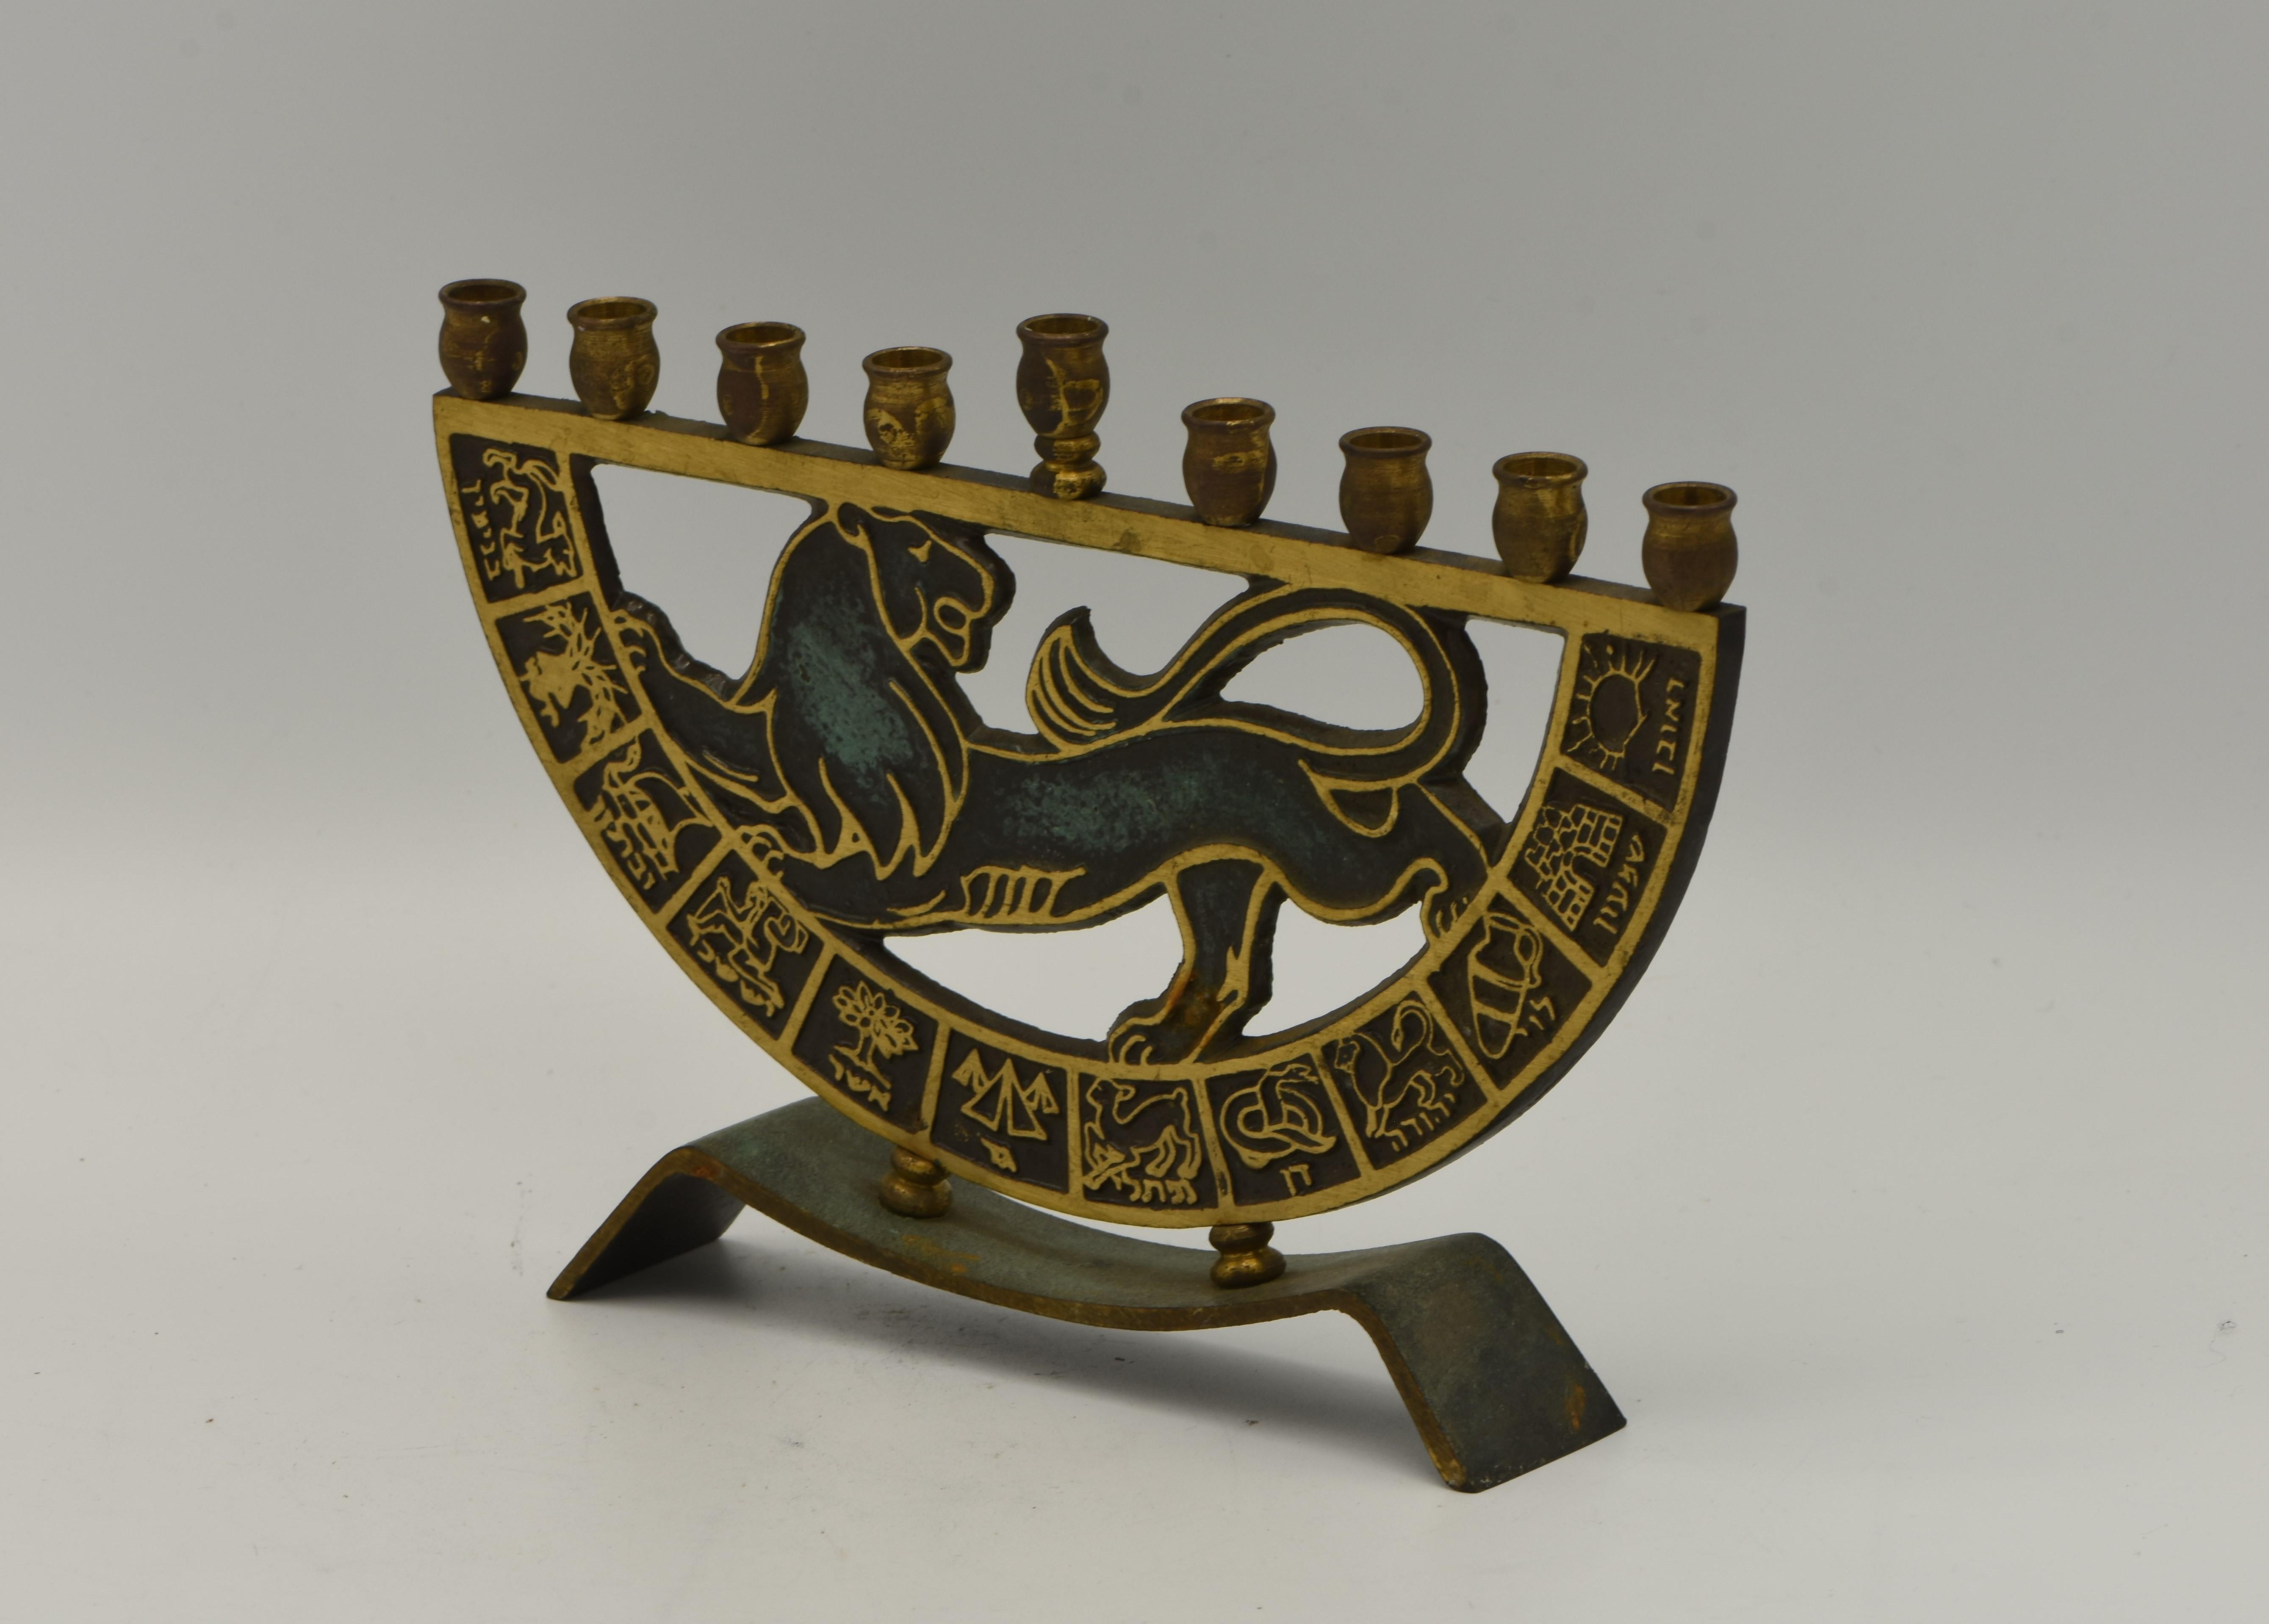 Hanukkah Lamp Menorah, brass, Israel, circa 1950.
On a rectangular base, lion of Judah surrounded by the Tribes of Israel symbols decorated with green patina. Stamped and numbered on the back.

Every item in Menorah Galleries is accompanied by a